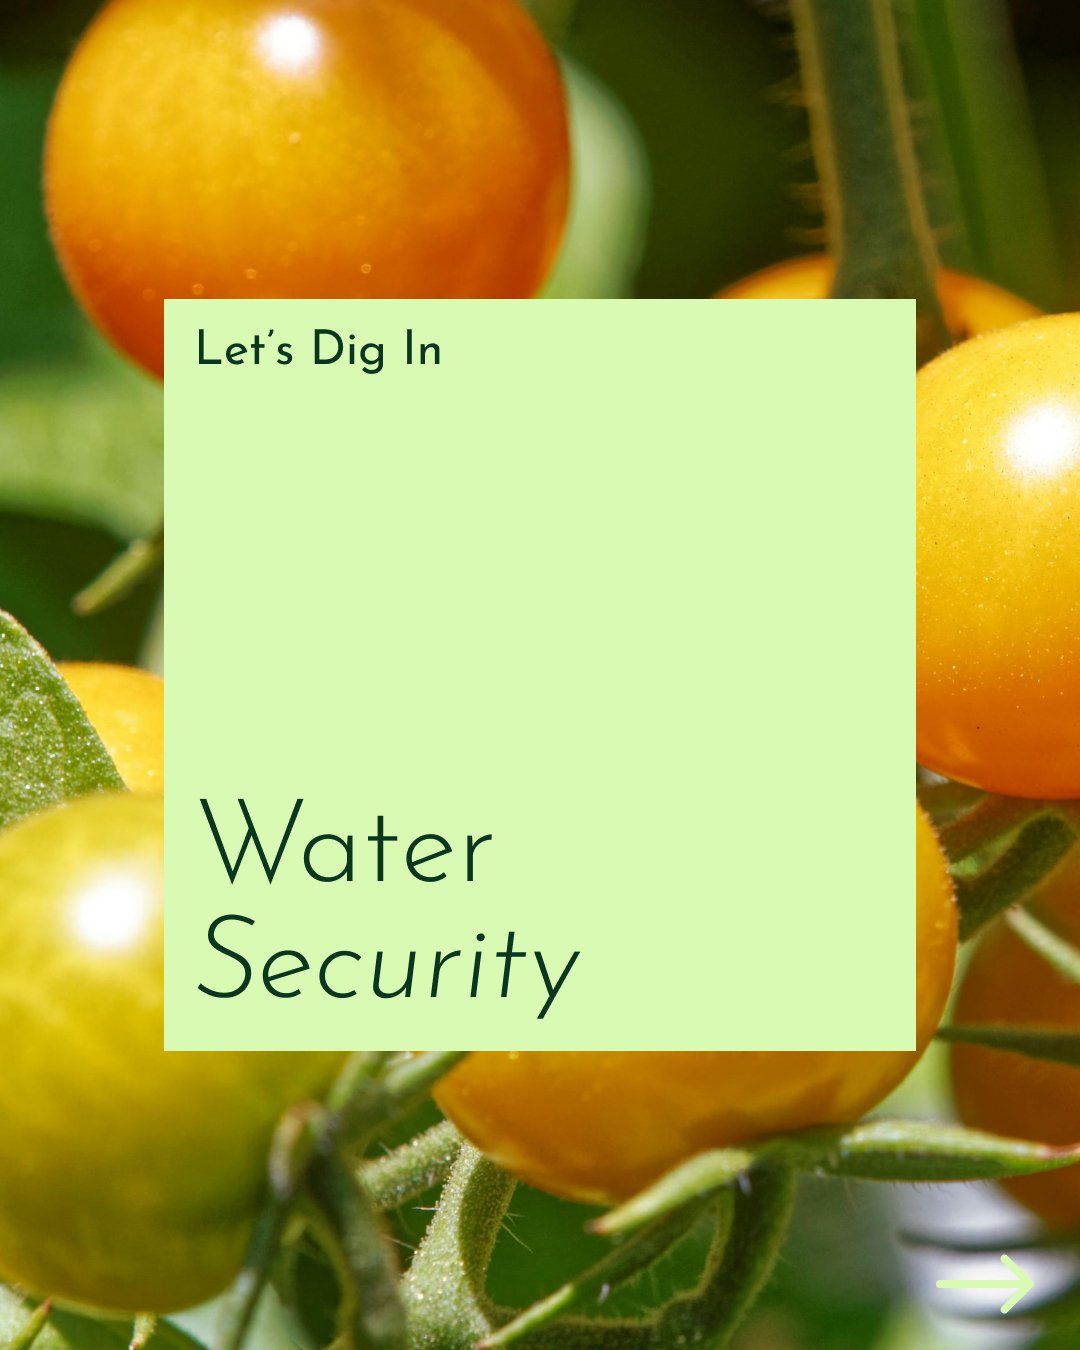 A Let's Dig In on Water Security. Share your thoughts with us in the comments below!

#shoplocal #freshproduce #food #fresh #supportsmallbusiness #farmtotable #local #buylocal #eatfresh #farm #farming #foodstagram #shoplocal #instagram #lifestyle #na